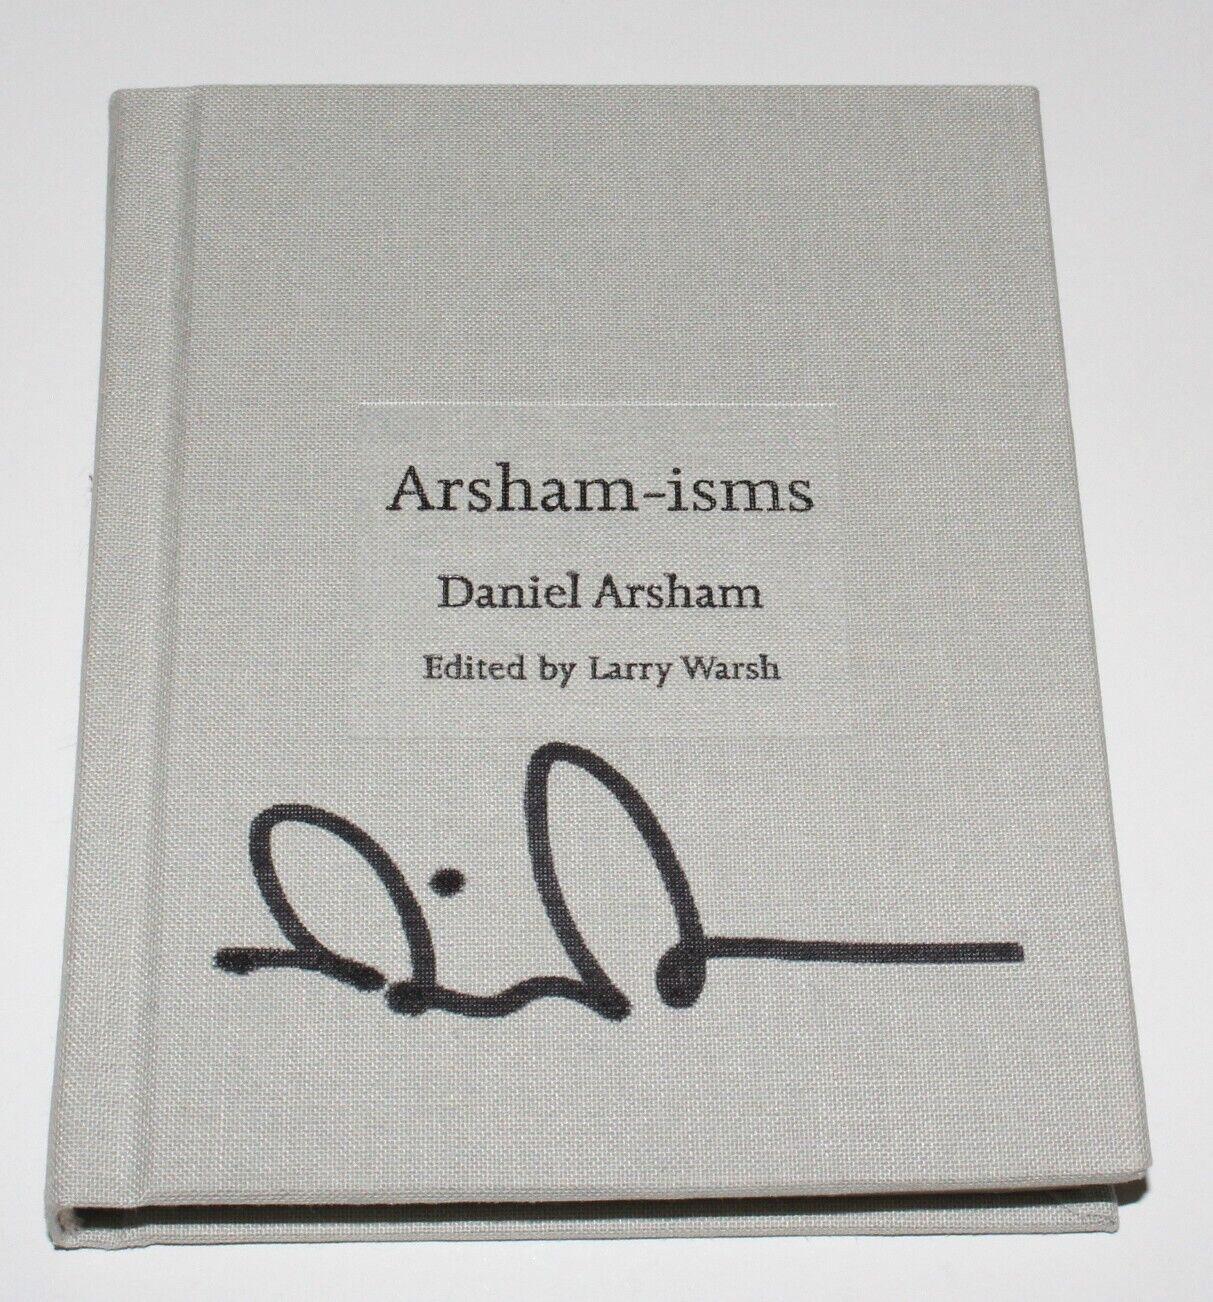 Signed Book Arsham-isms edited by Larry Warsh - Mixed Media Art by Daniel Arsham